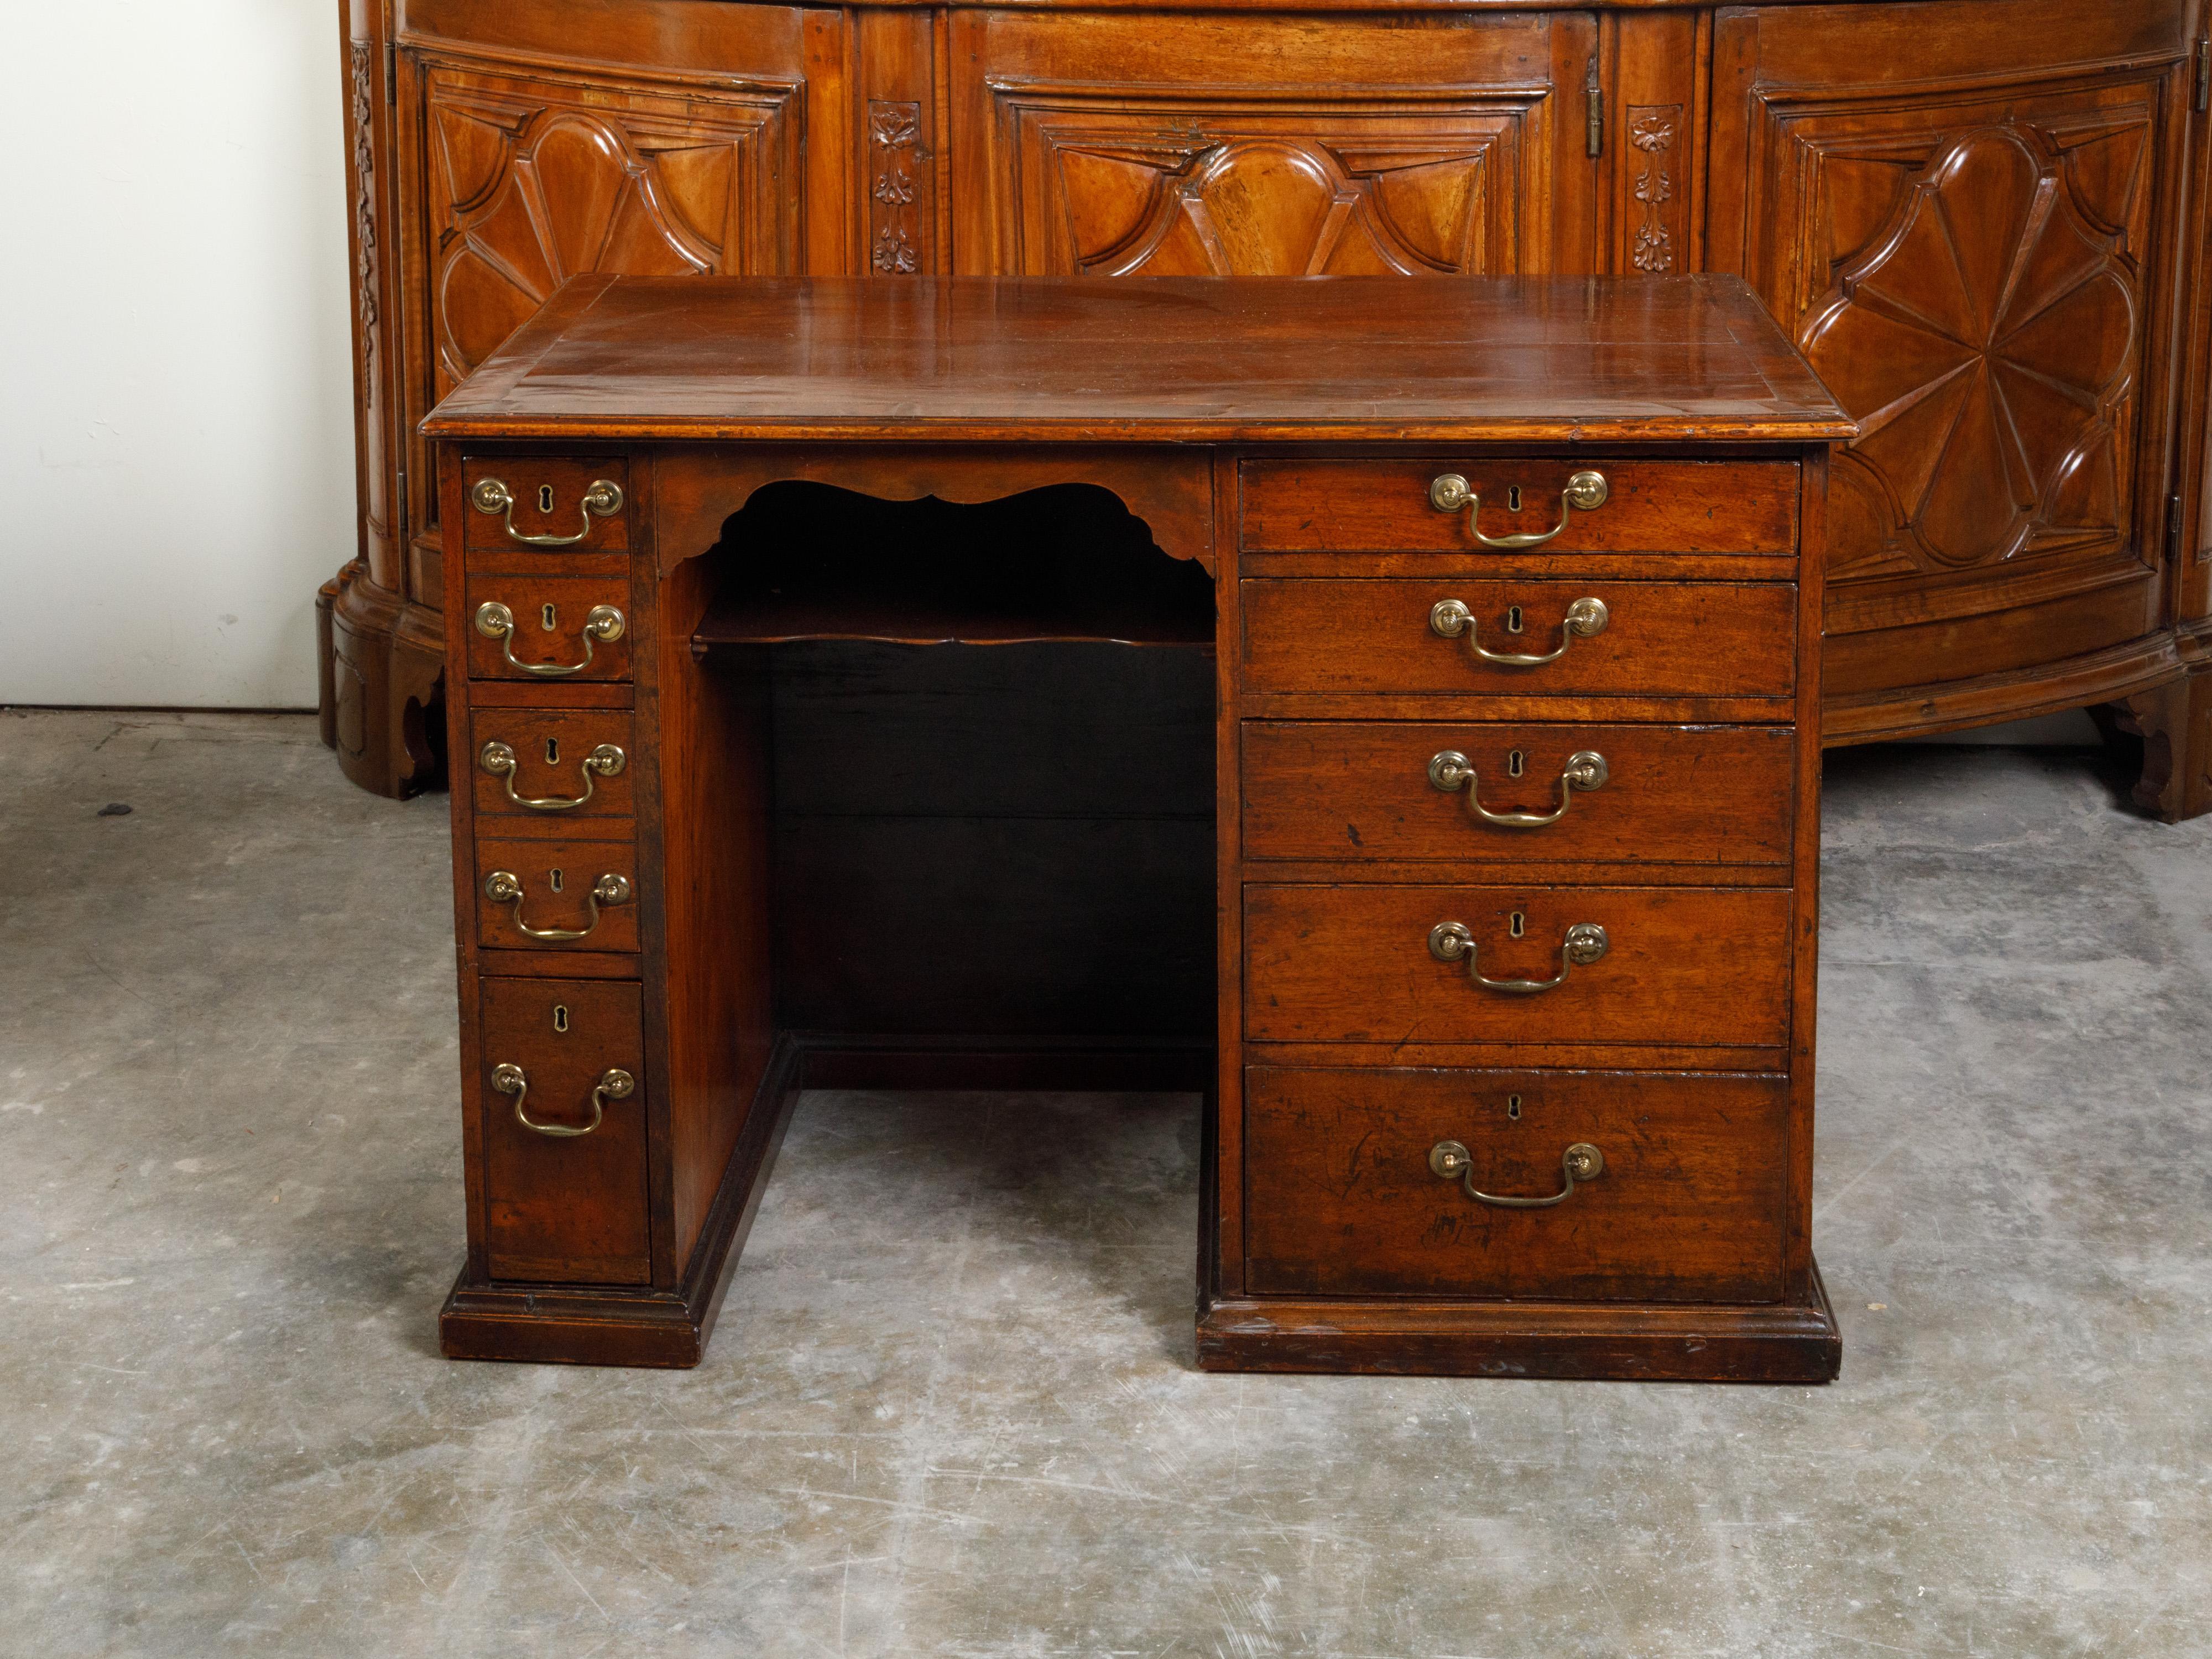 An English Georgian period mahogany desk from the 19th century, with 10 graduating drawers and brass hardware. Created in England during the Georgian period, this mahogany desk features a rectangular top sitting above 10 graduating drawers